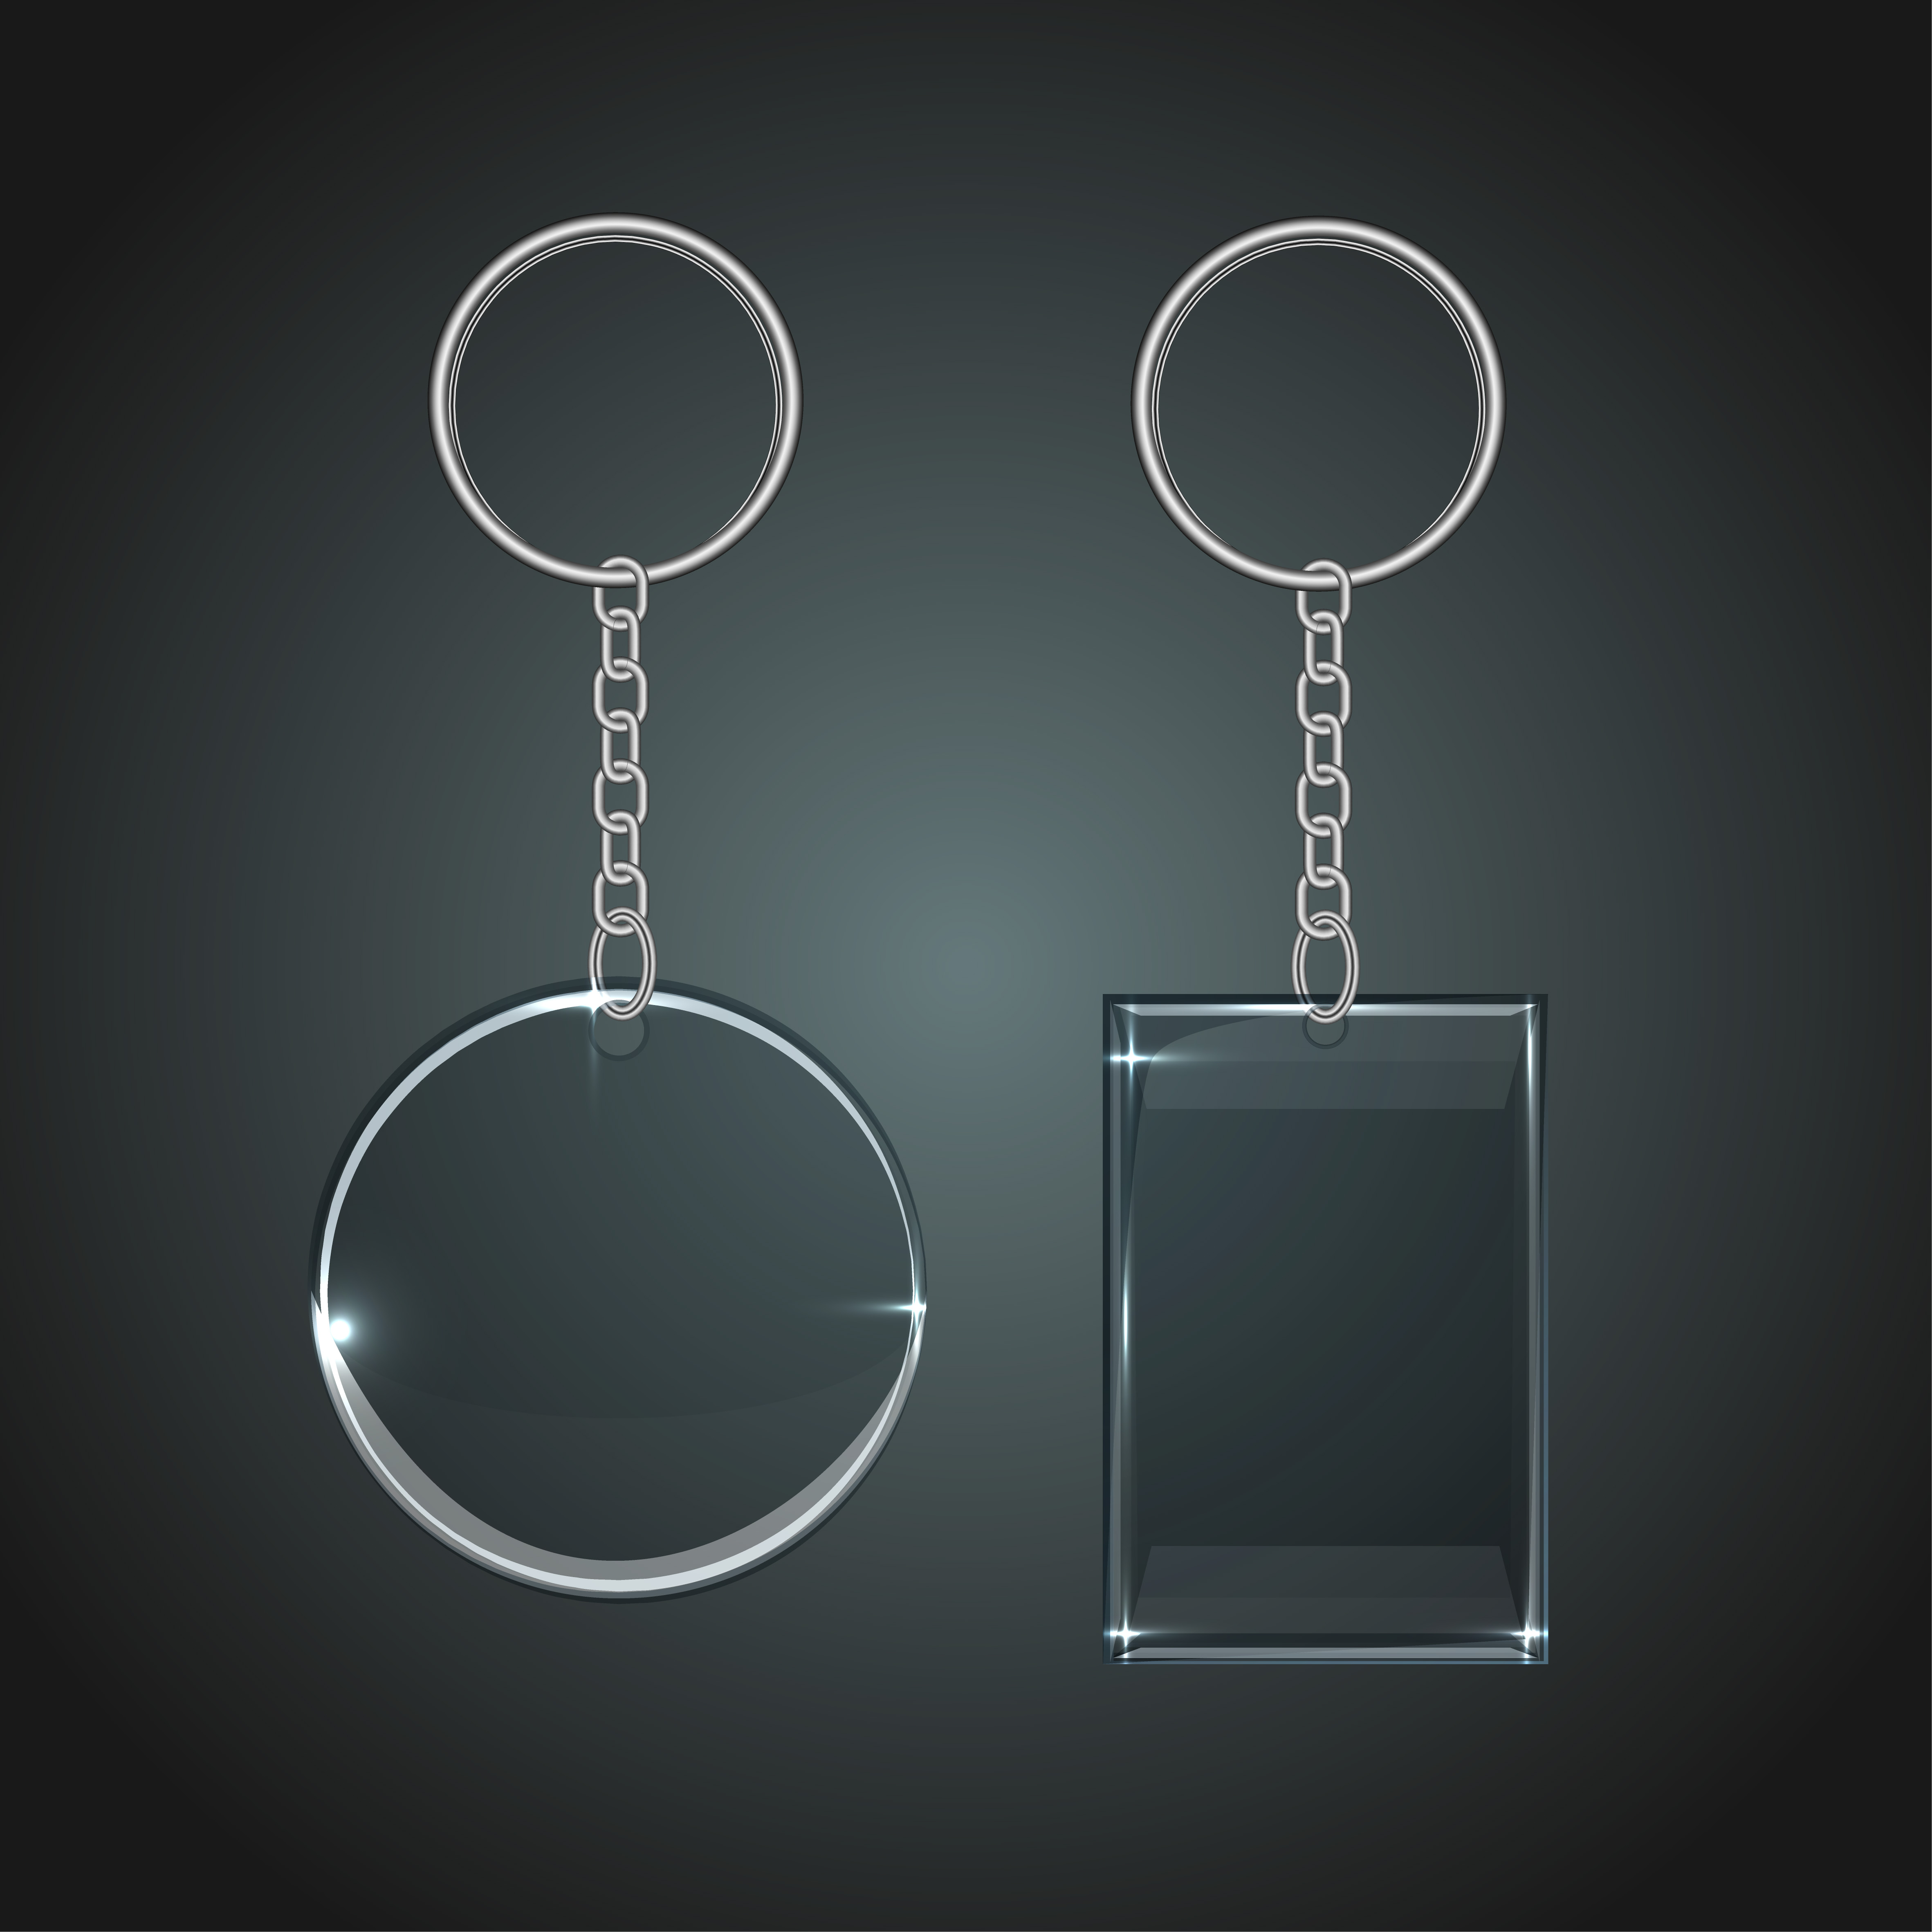 Download Shining keychain template vectors 05 free download